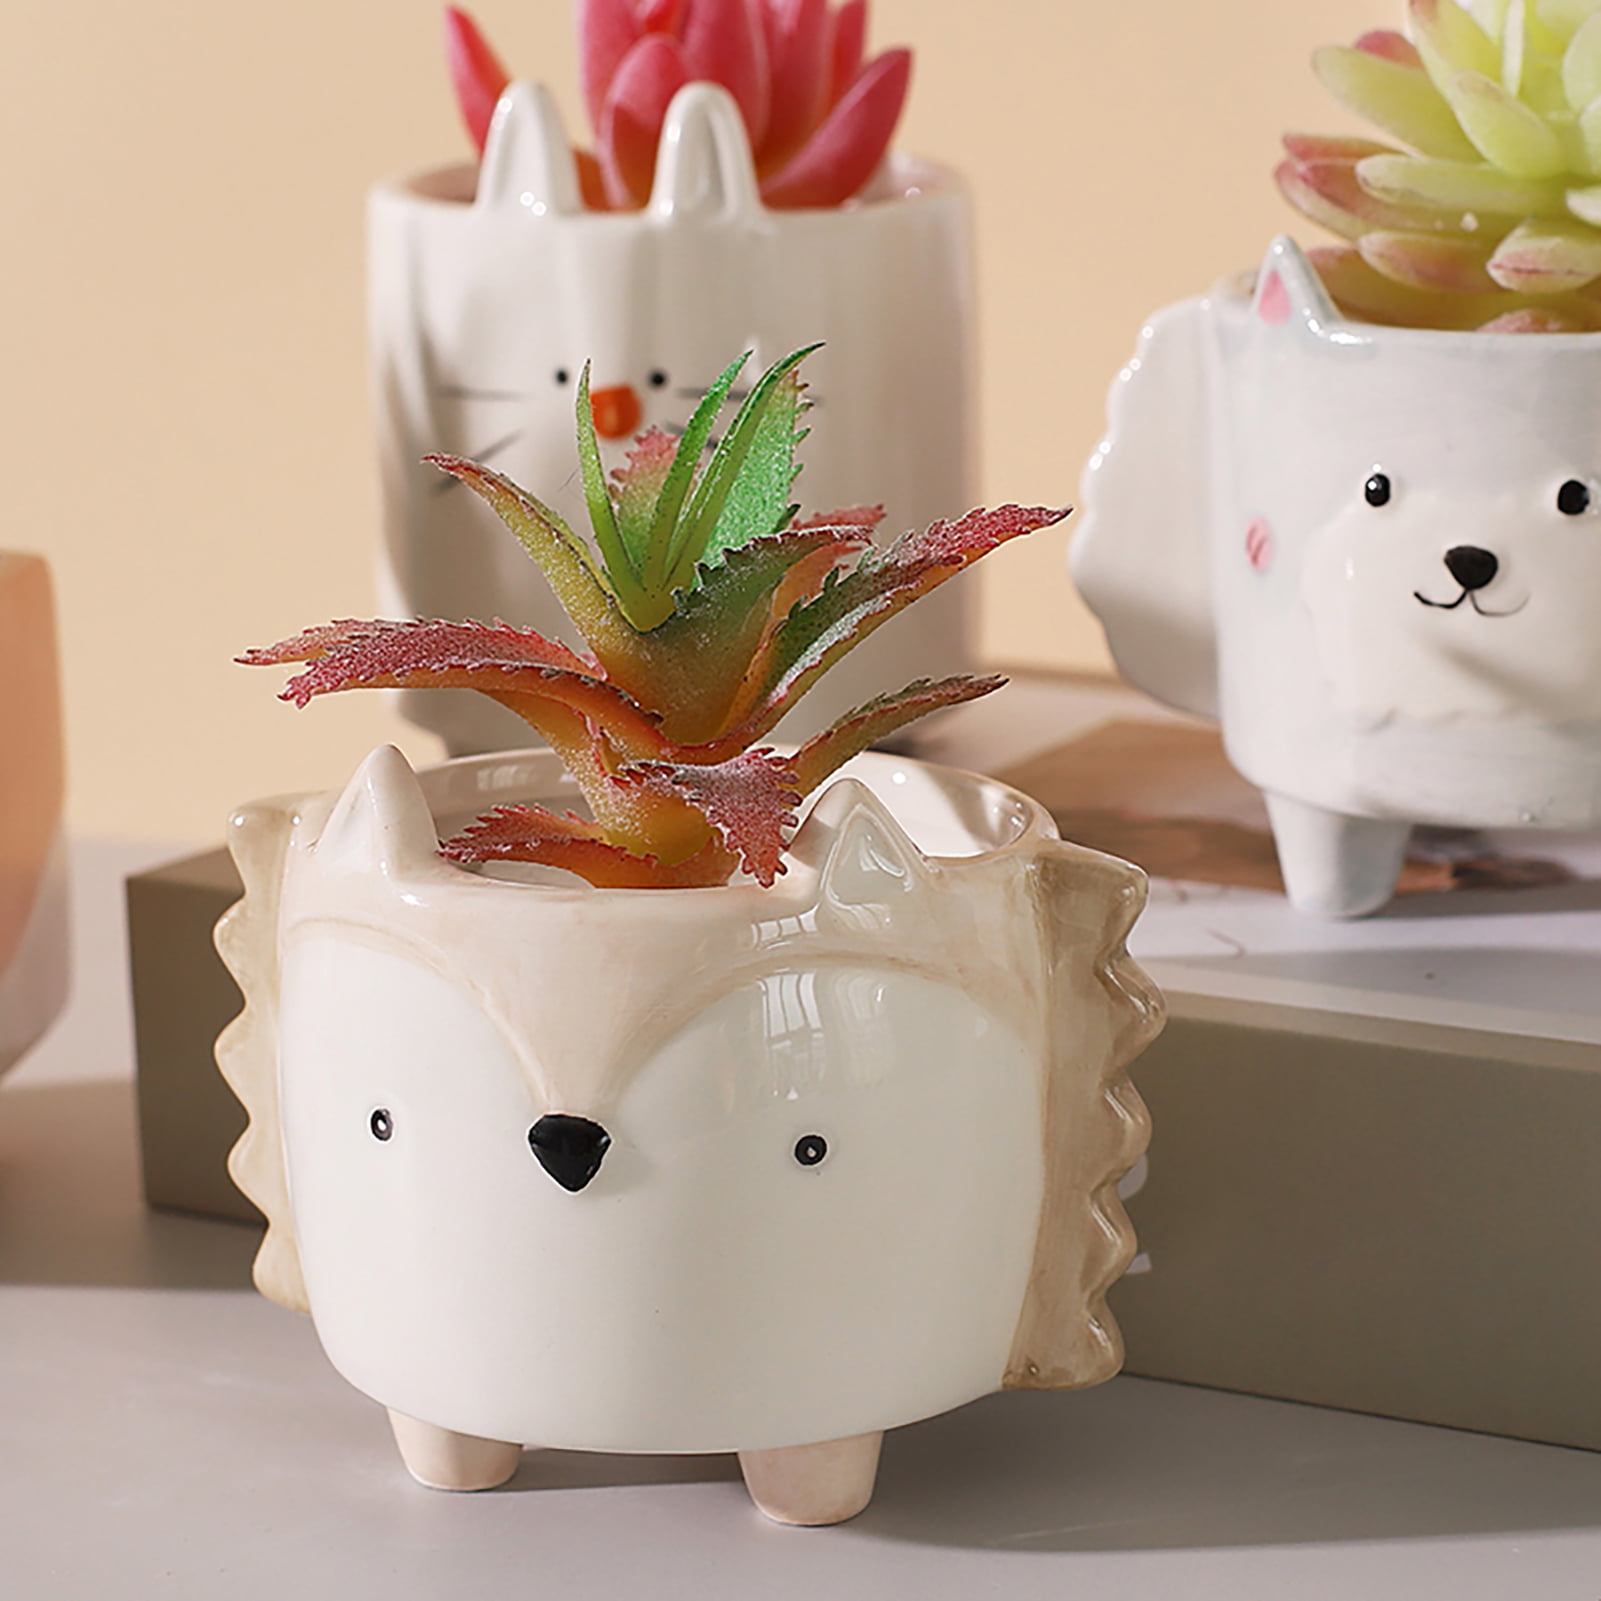 DIY Paint Your Own Animal Ceramic Succulent Planters Set of 3 DIY Set of 3 Backyard Animals 3.25 Inch Cactus Pots with Drainage Hole Cute Gift Owl Fox Hedgehog